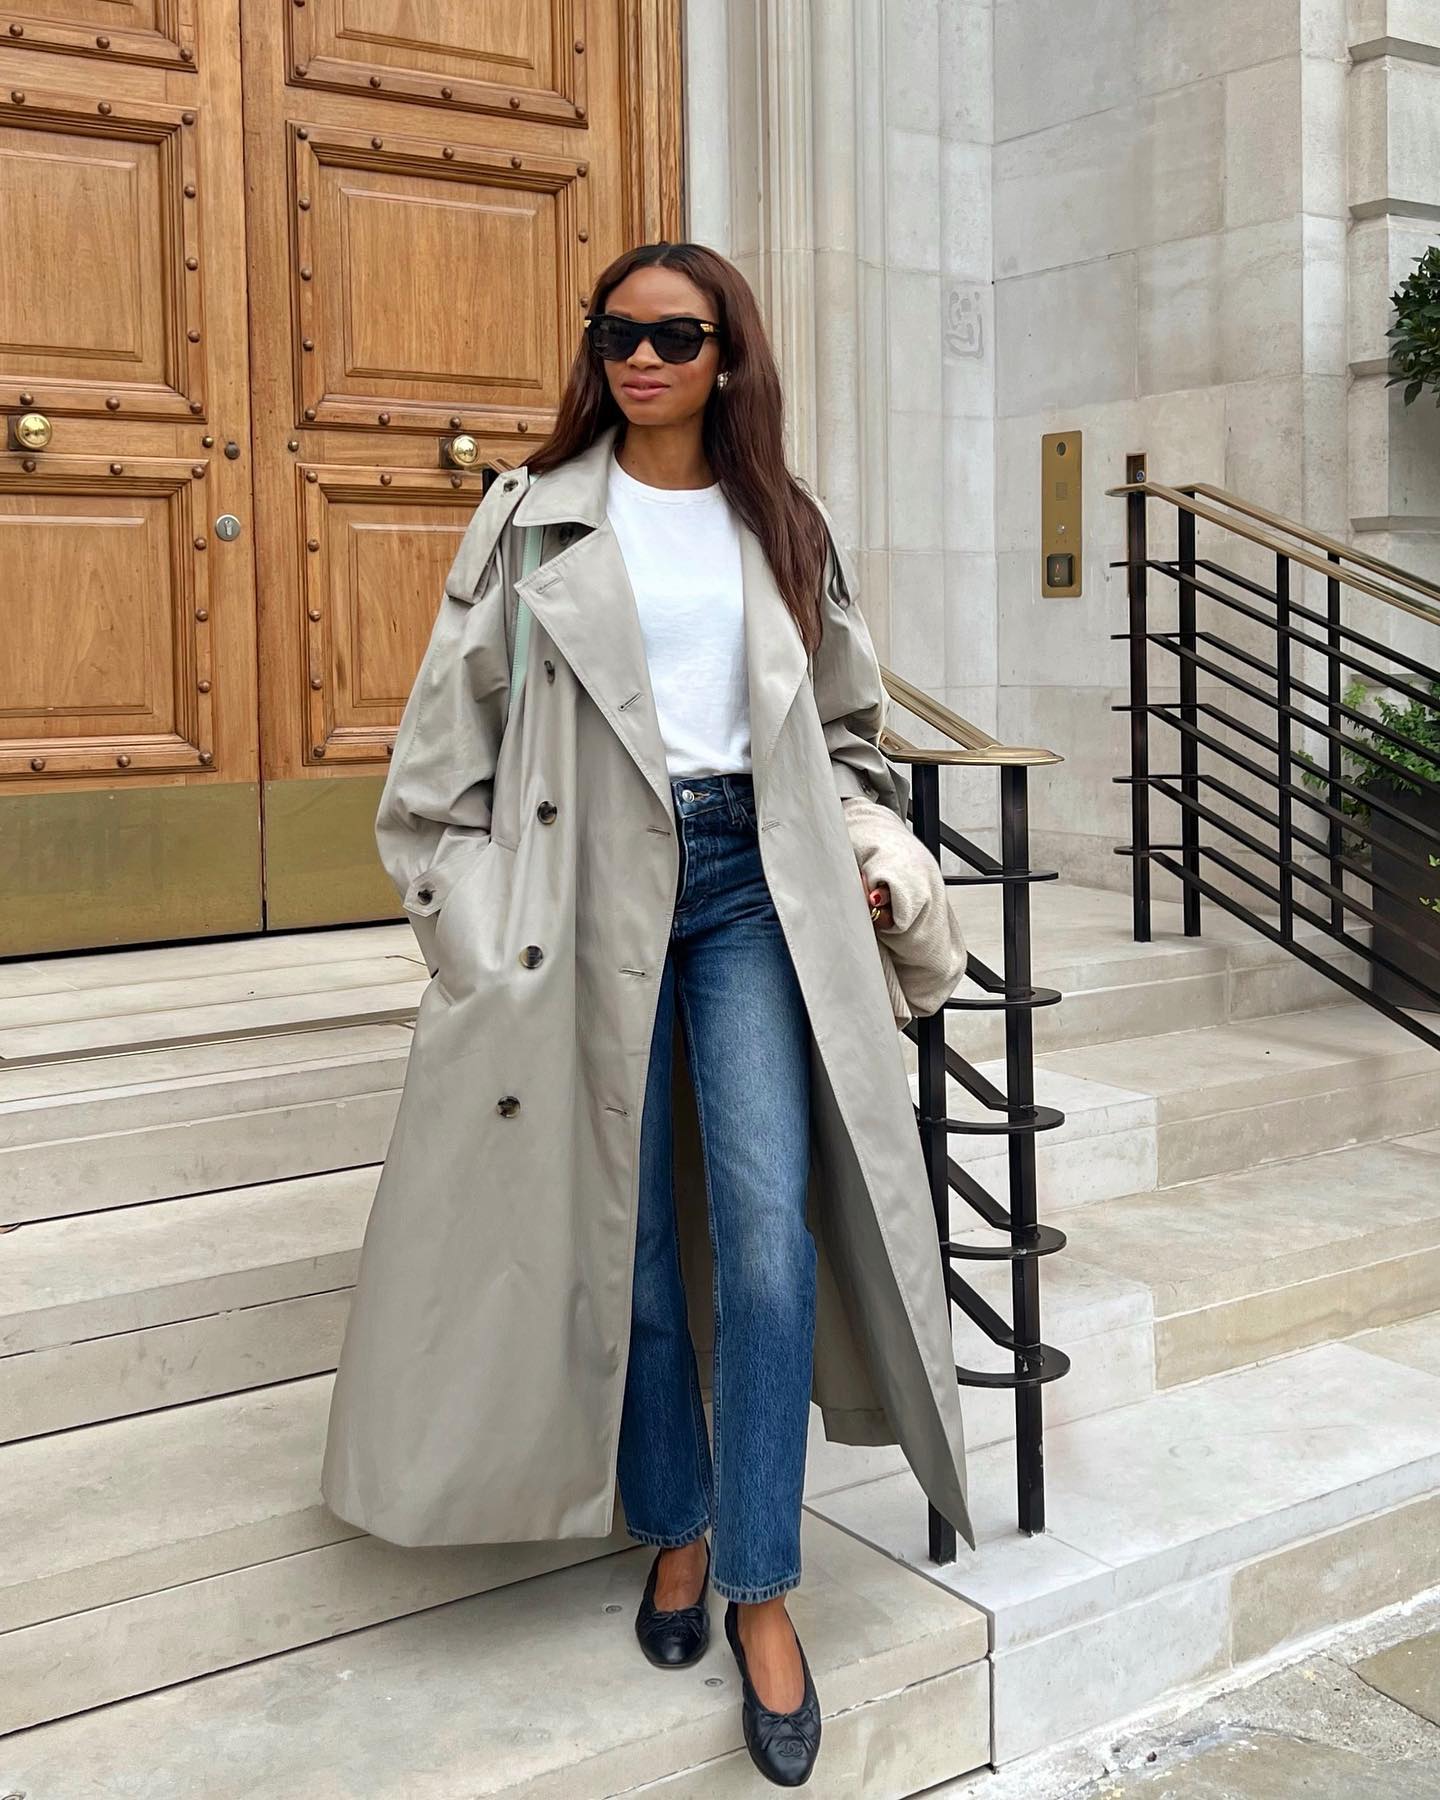 stylish French woman poses on steps in Paris wearing black sunglasses, a trench coat, white T-shirt, jeans, and black ballet flats